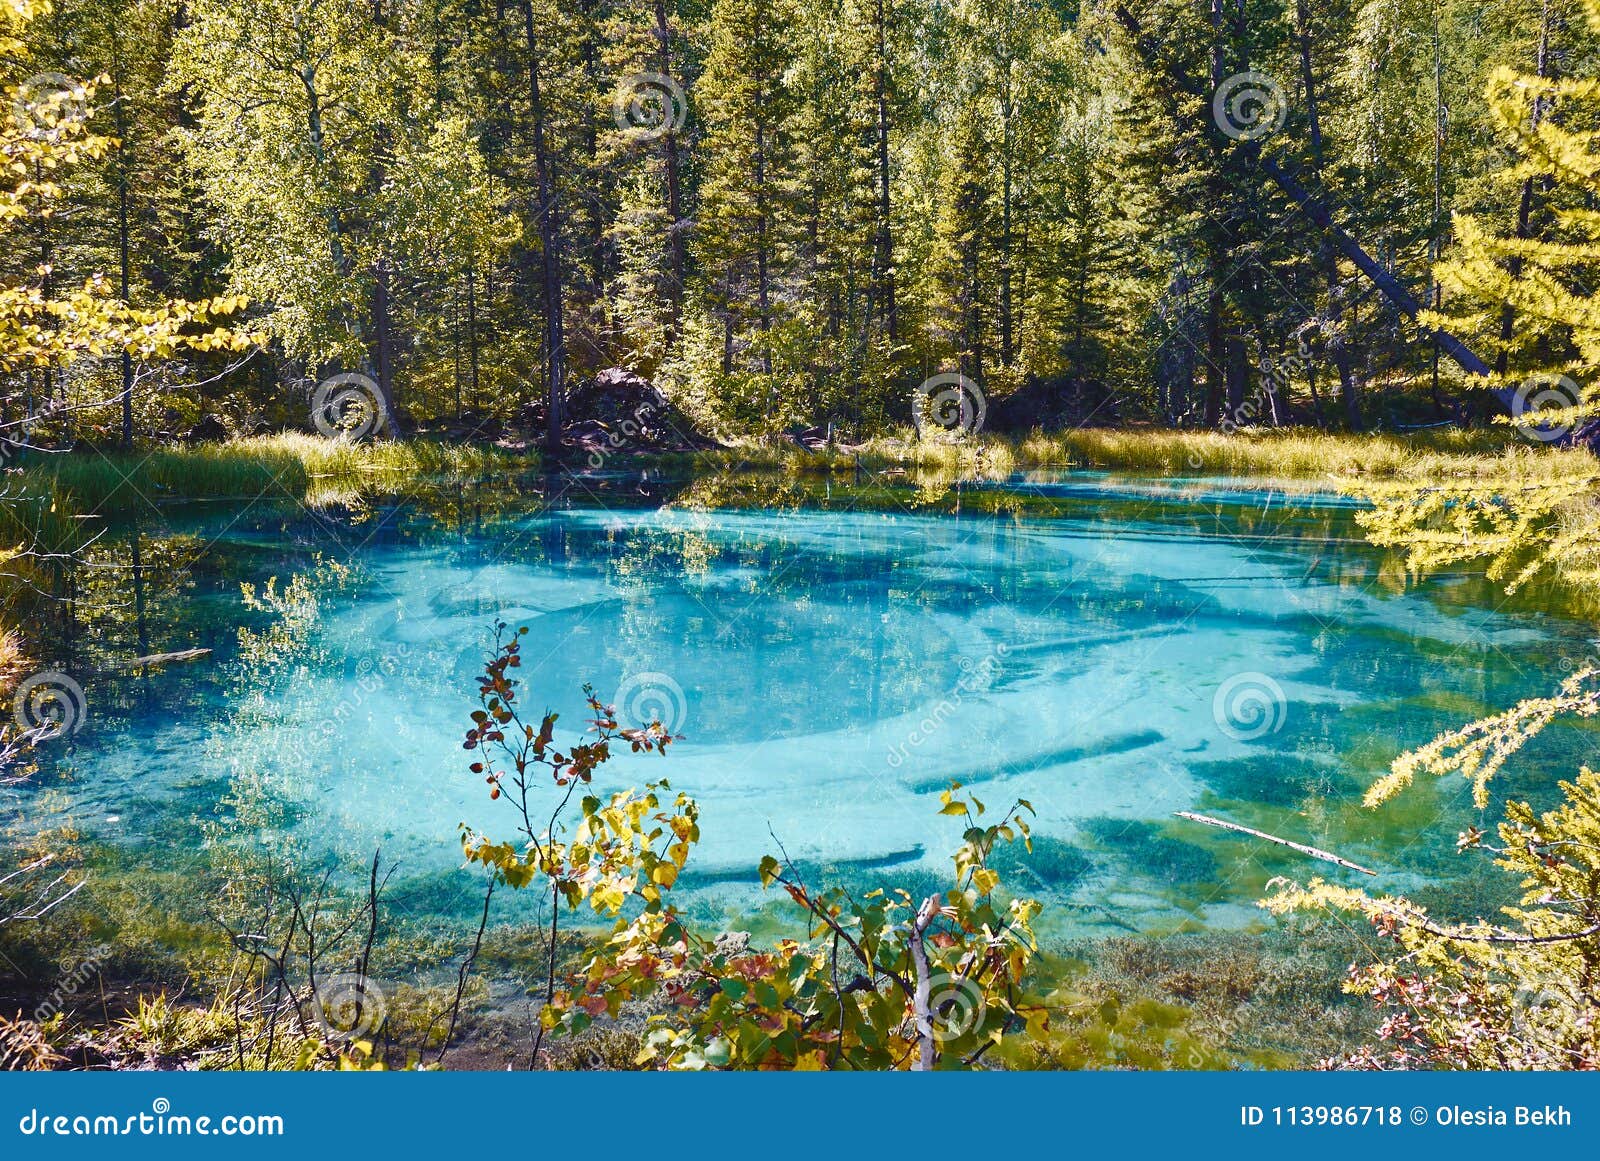 blue geyser lake surrounded by forests in the altai mountain, russia